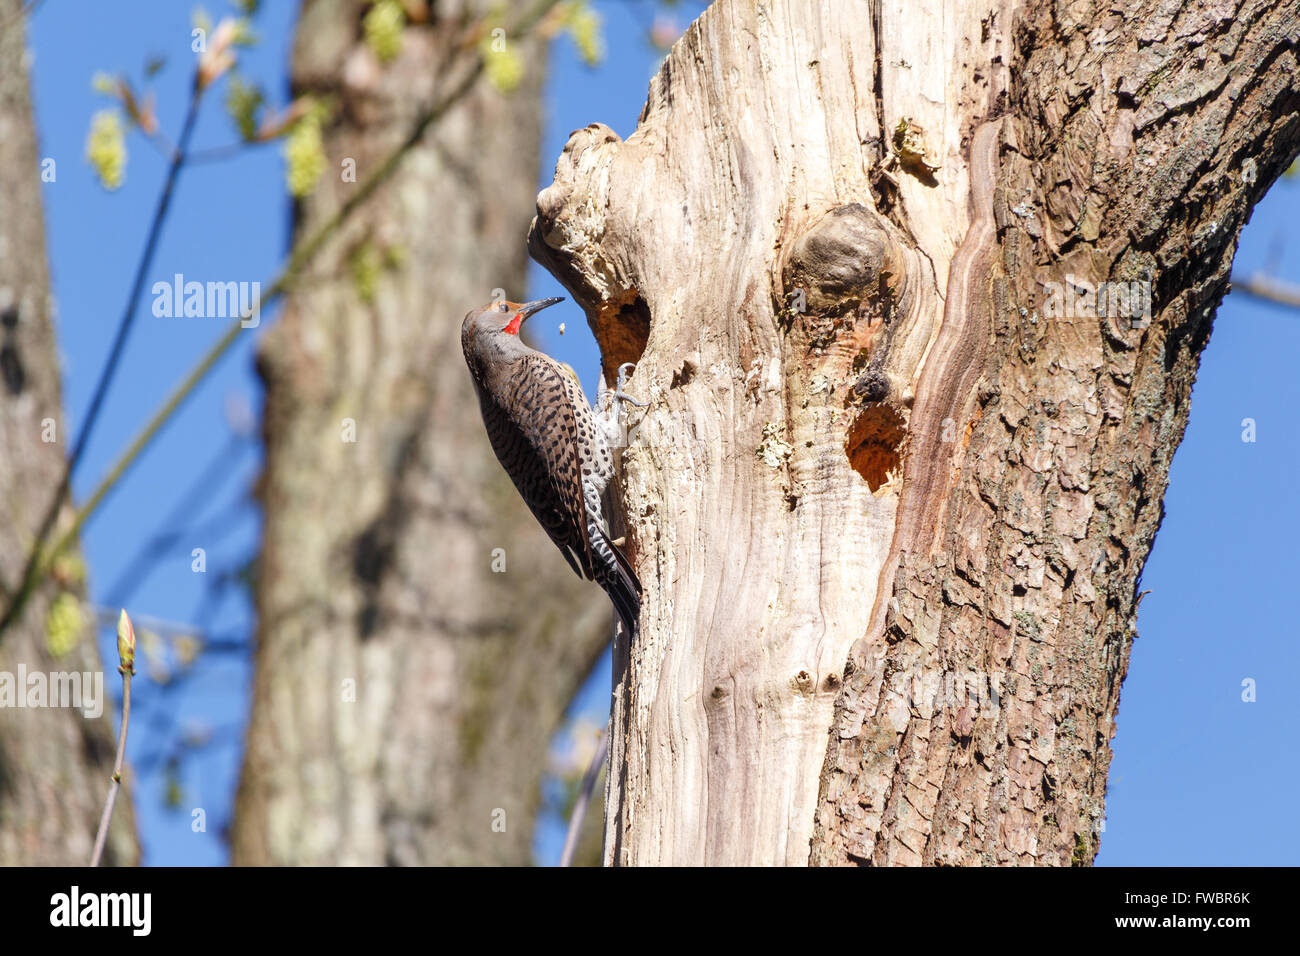 Northern Flicker, a woodpecker, at a cavity nest hole in the tree trunk. Stock Photo